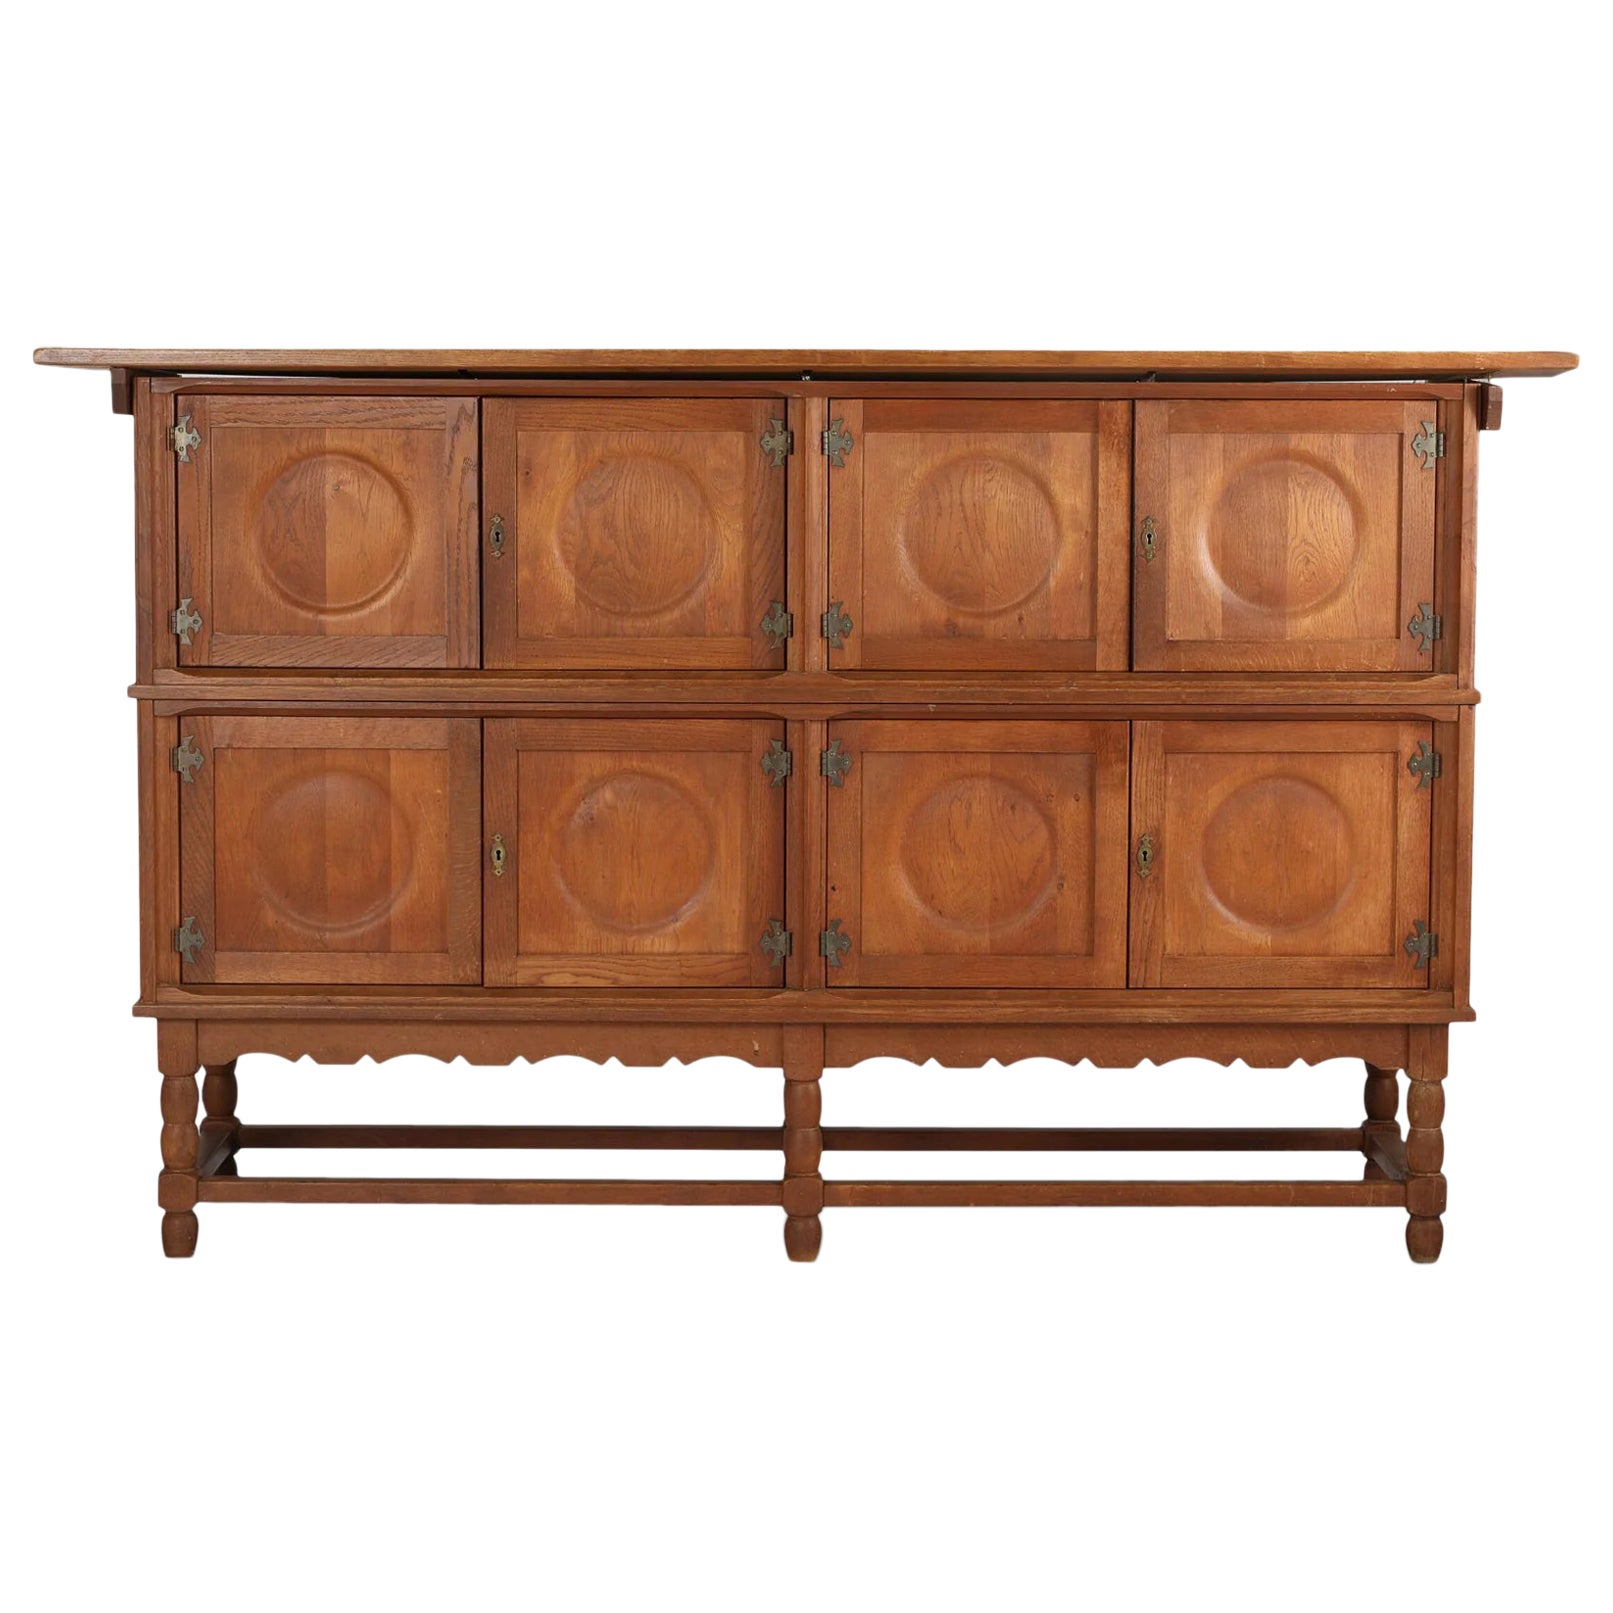 Tall oak sideboard with eight circular doors by henry kjaernulf For Sale